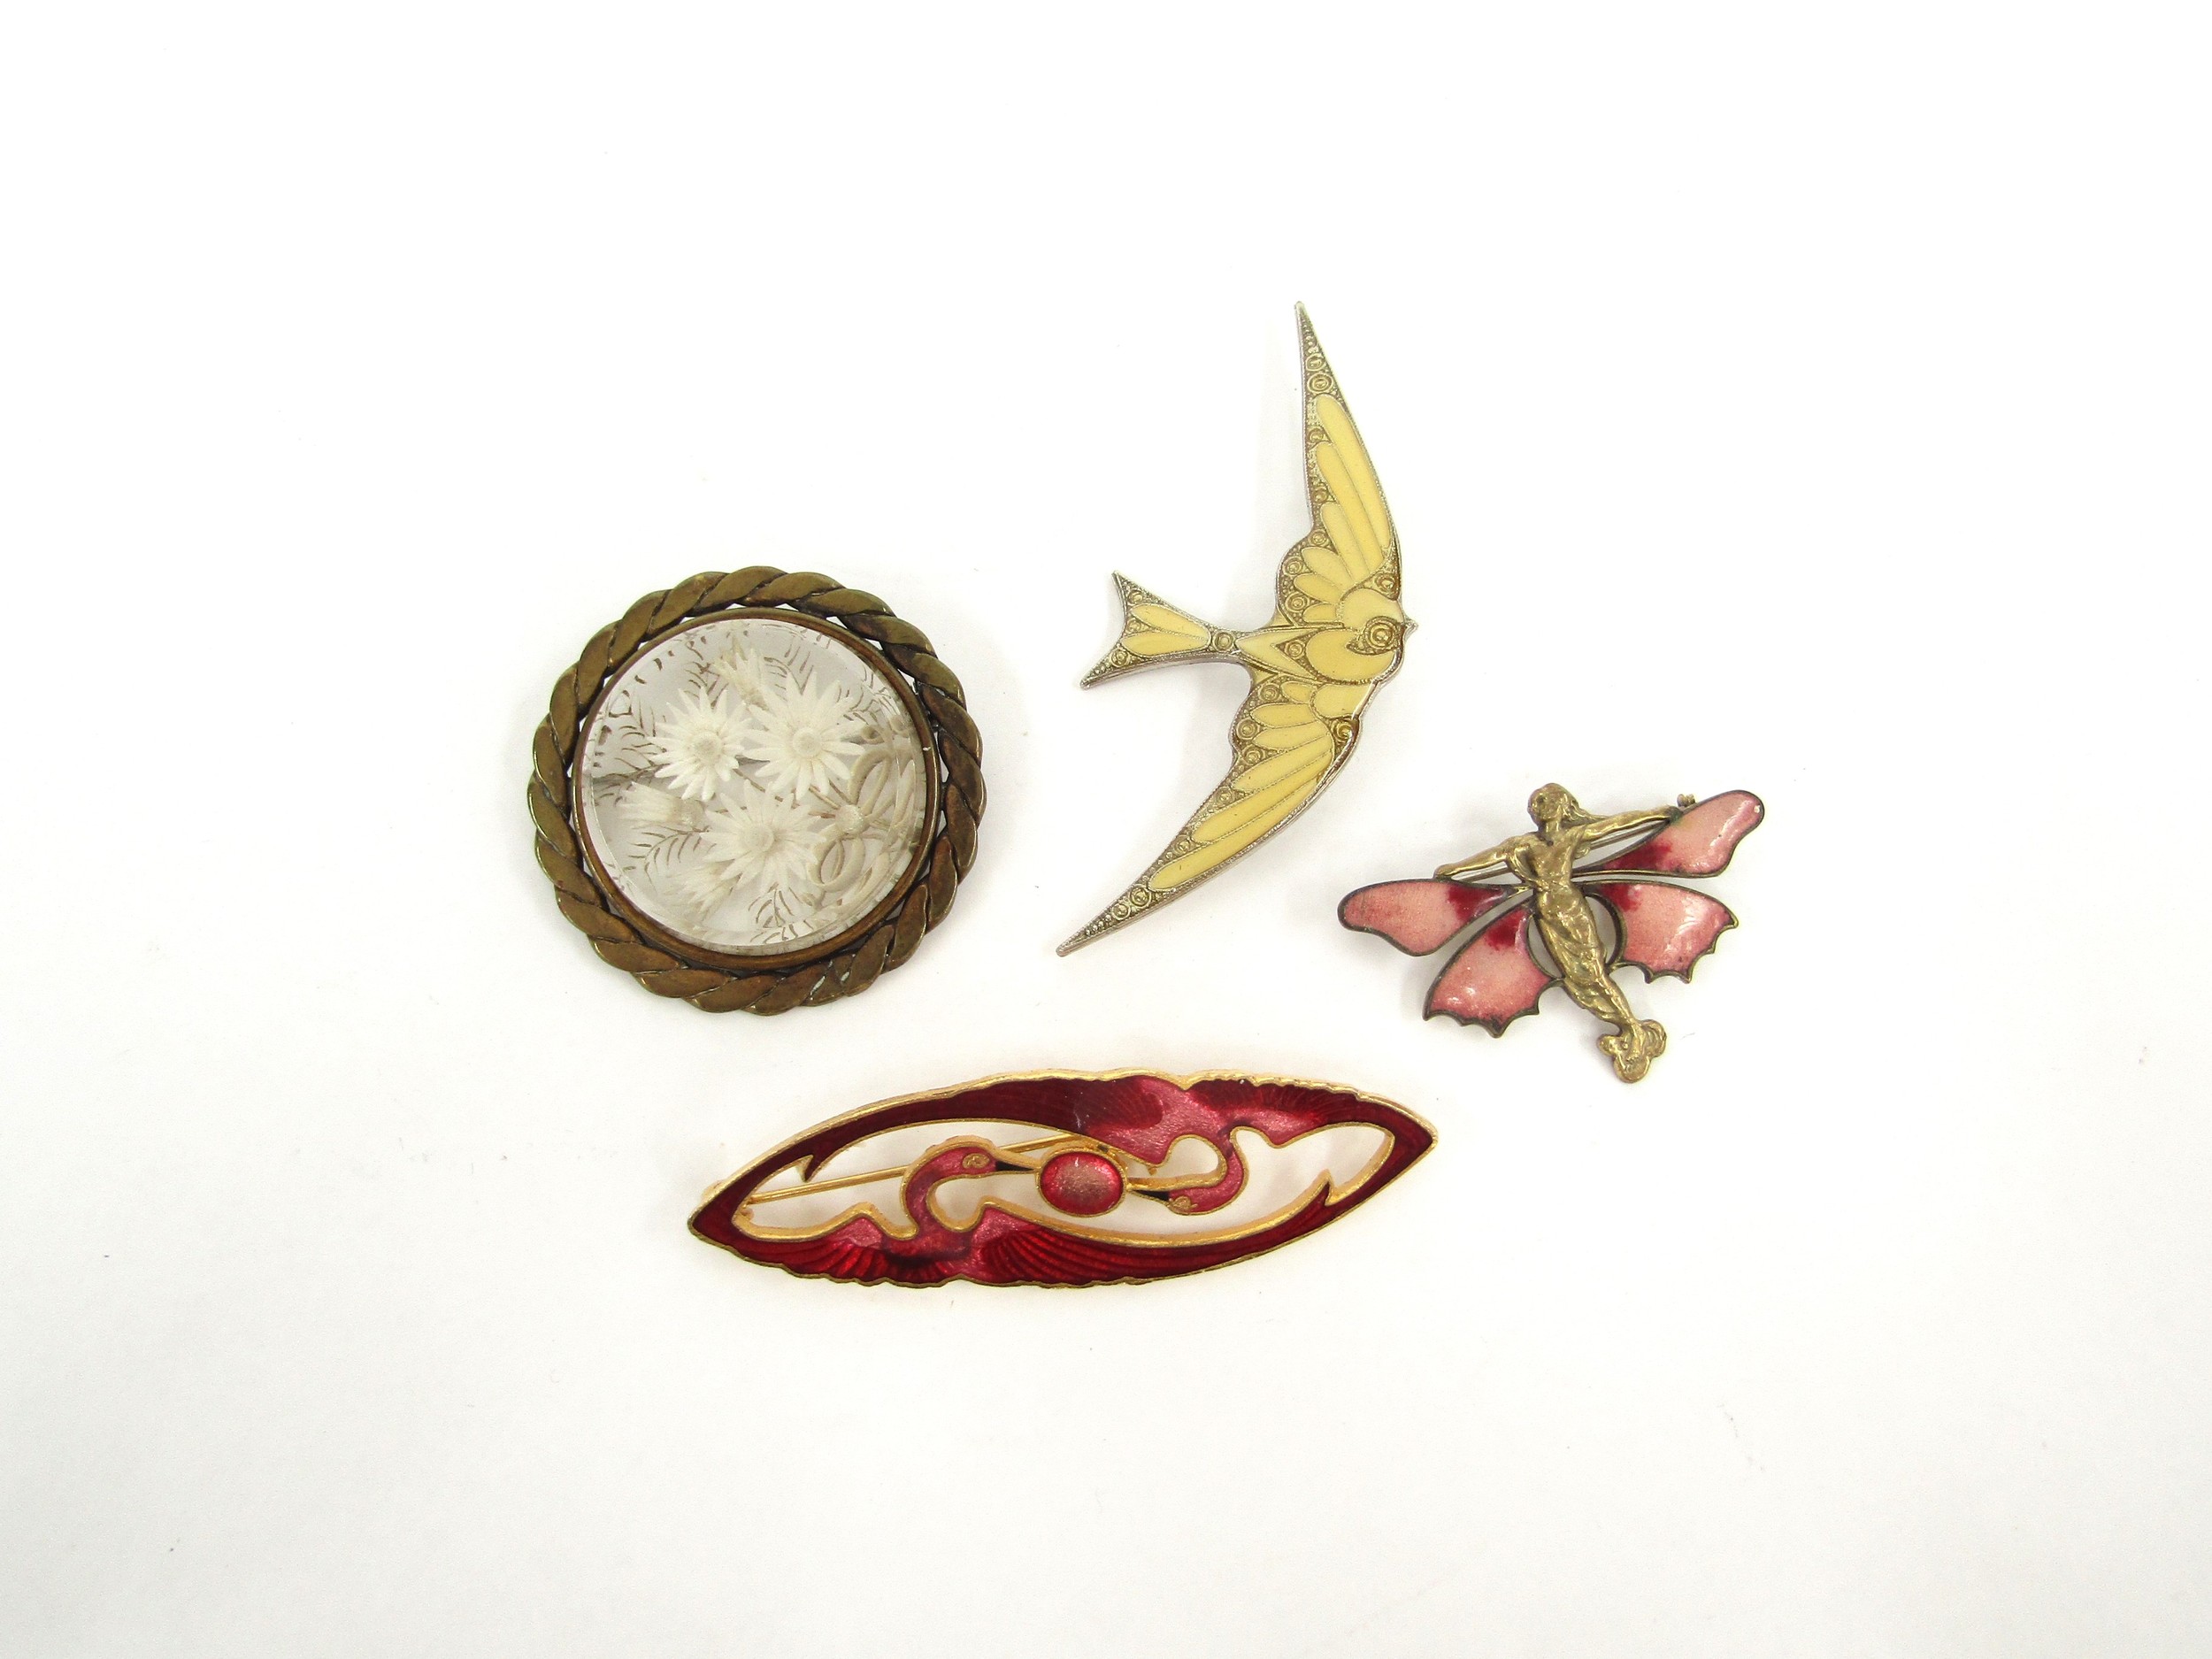 Four decorative brooches including fairy, swallow, flamingo and floral